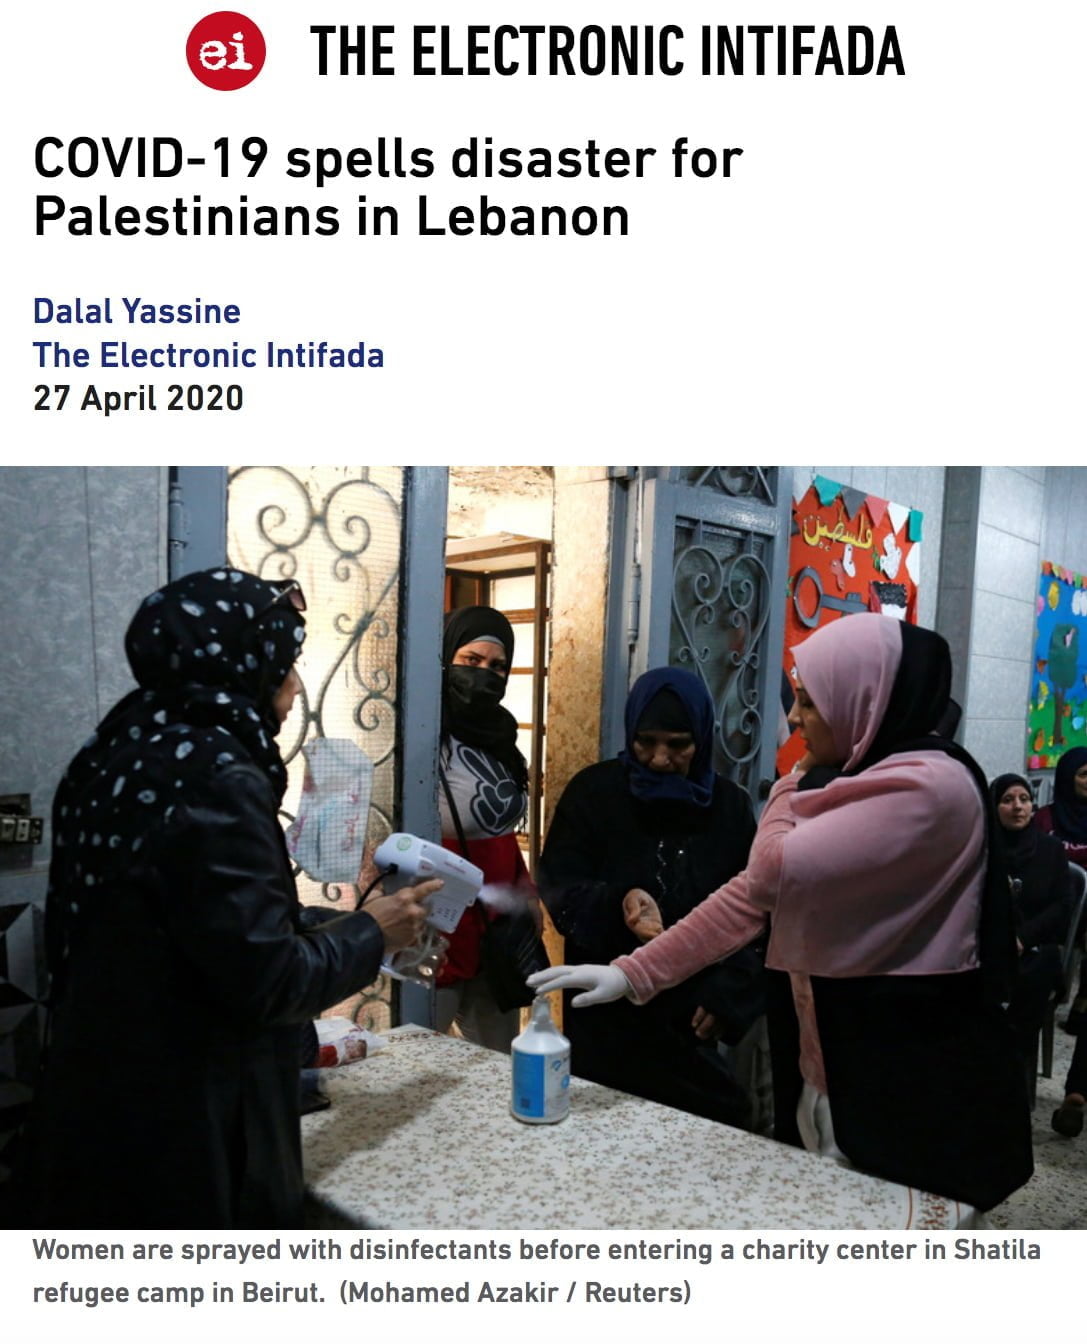 COVID-19 spells disaster for Palestinians in Lebanon